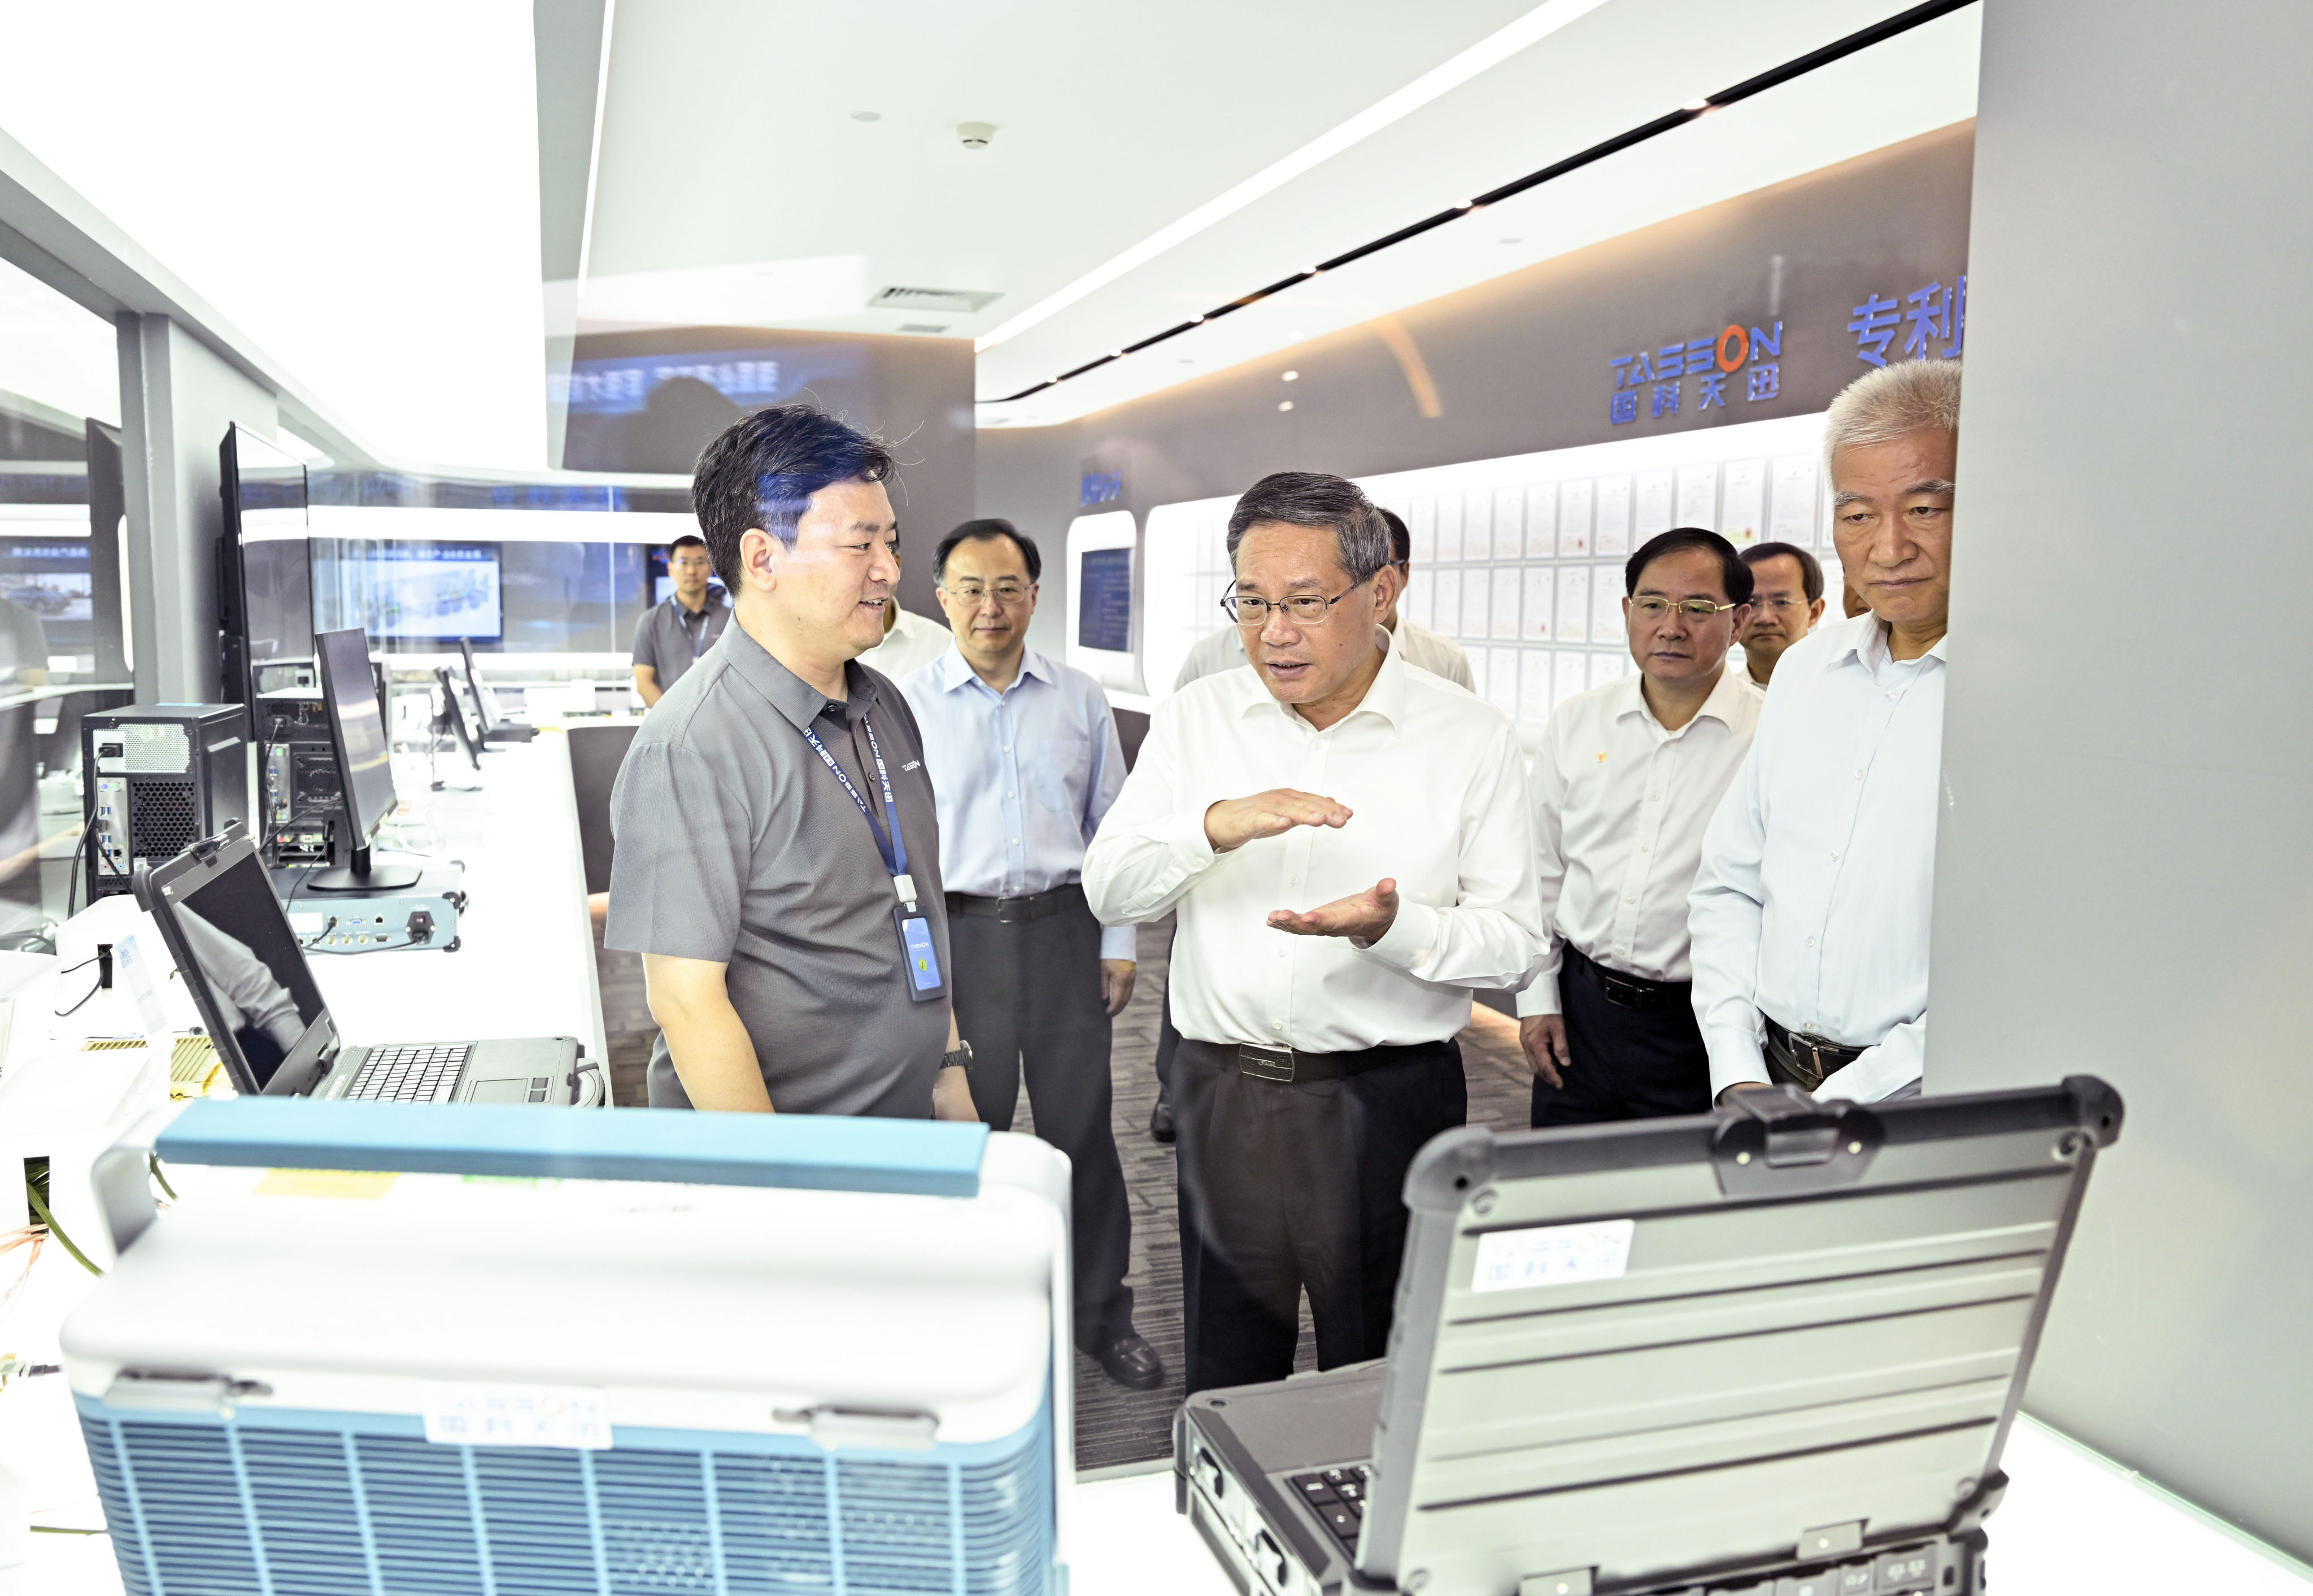 Chinese Premier Li Qiang inspects Tasson, a technology company, during an inspection tour in Beijing on Thursday. It was Li’s second tech-focused trip after a three-day visit in August to southern Guangdong province. Photo: Xinhua